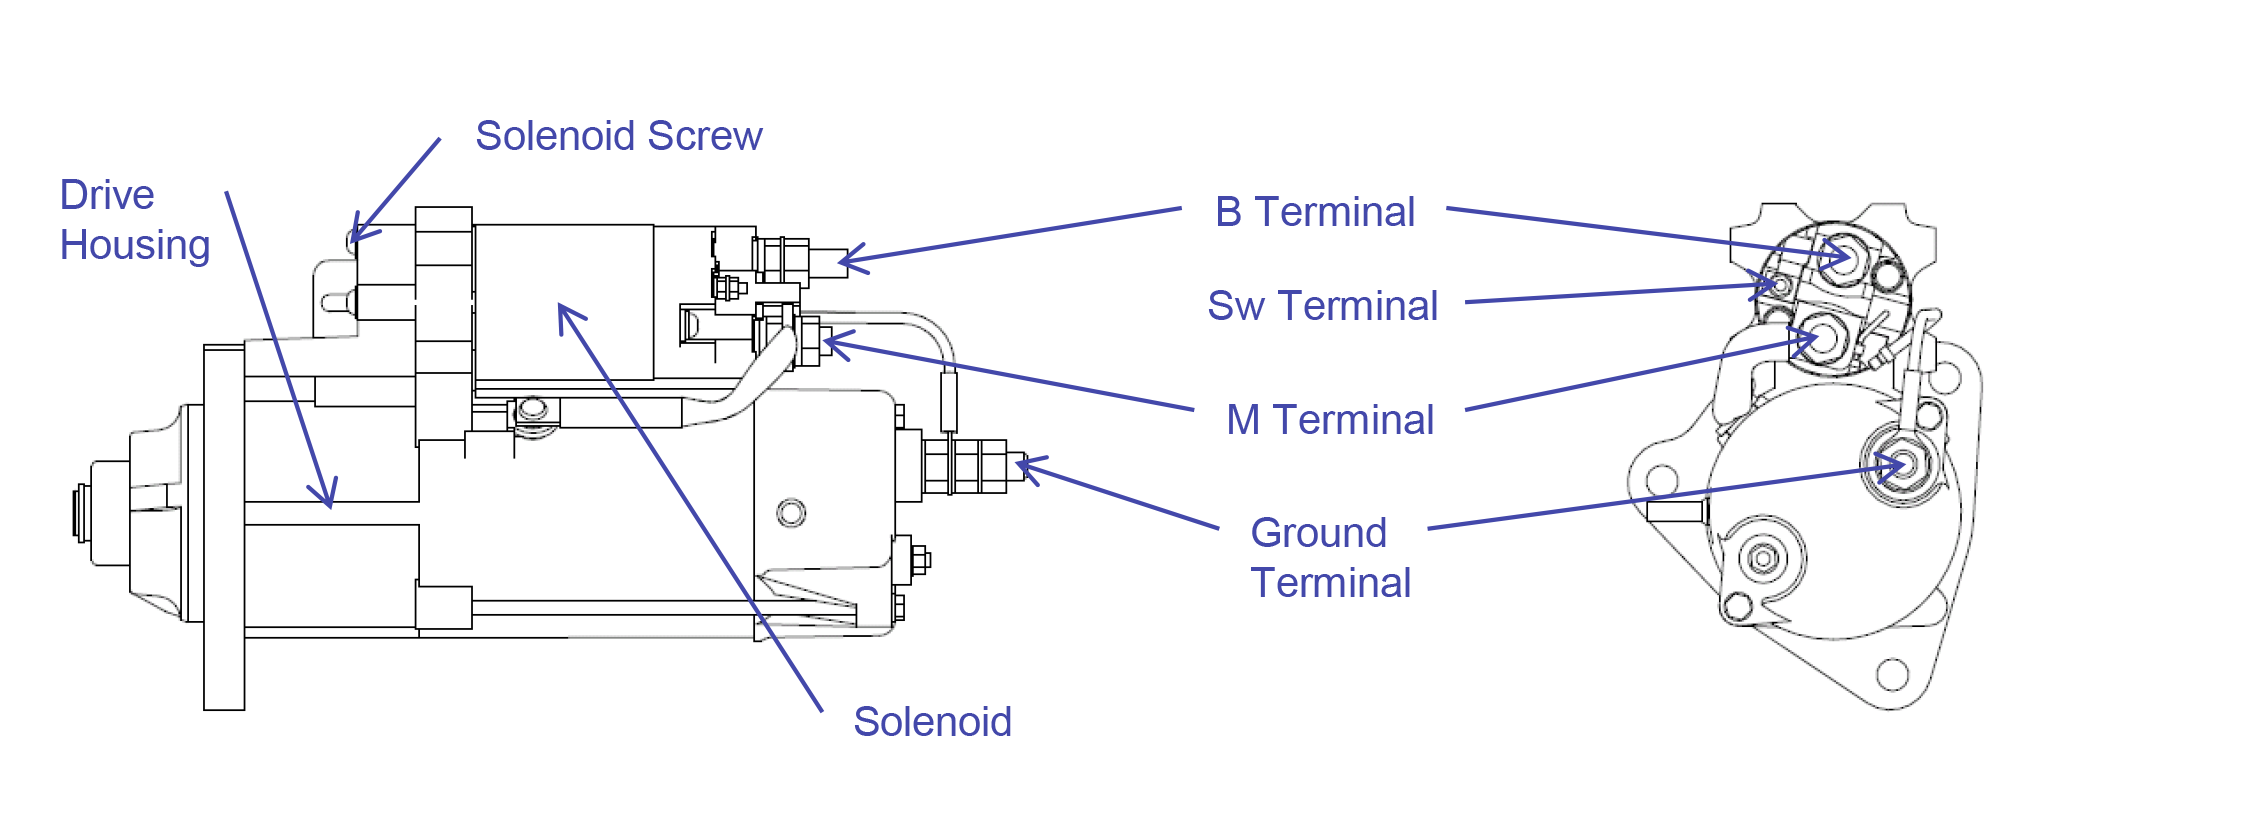 Solenoid Starter Diagram showing the details for the removal and replacement of the solenoid for the FL0579 and MK0077 starters.